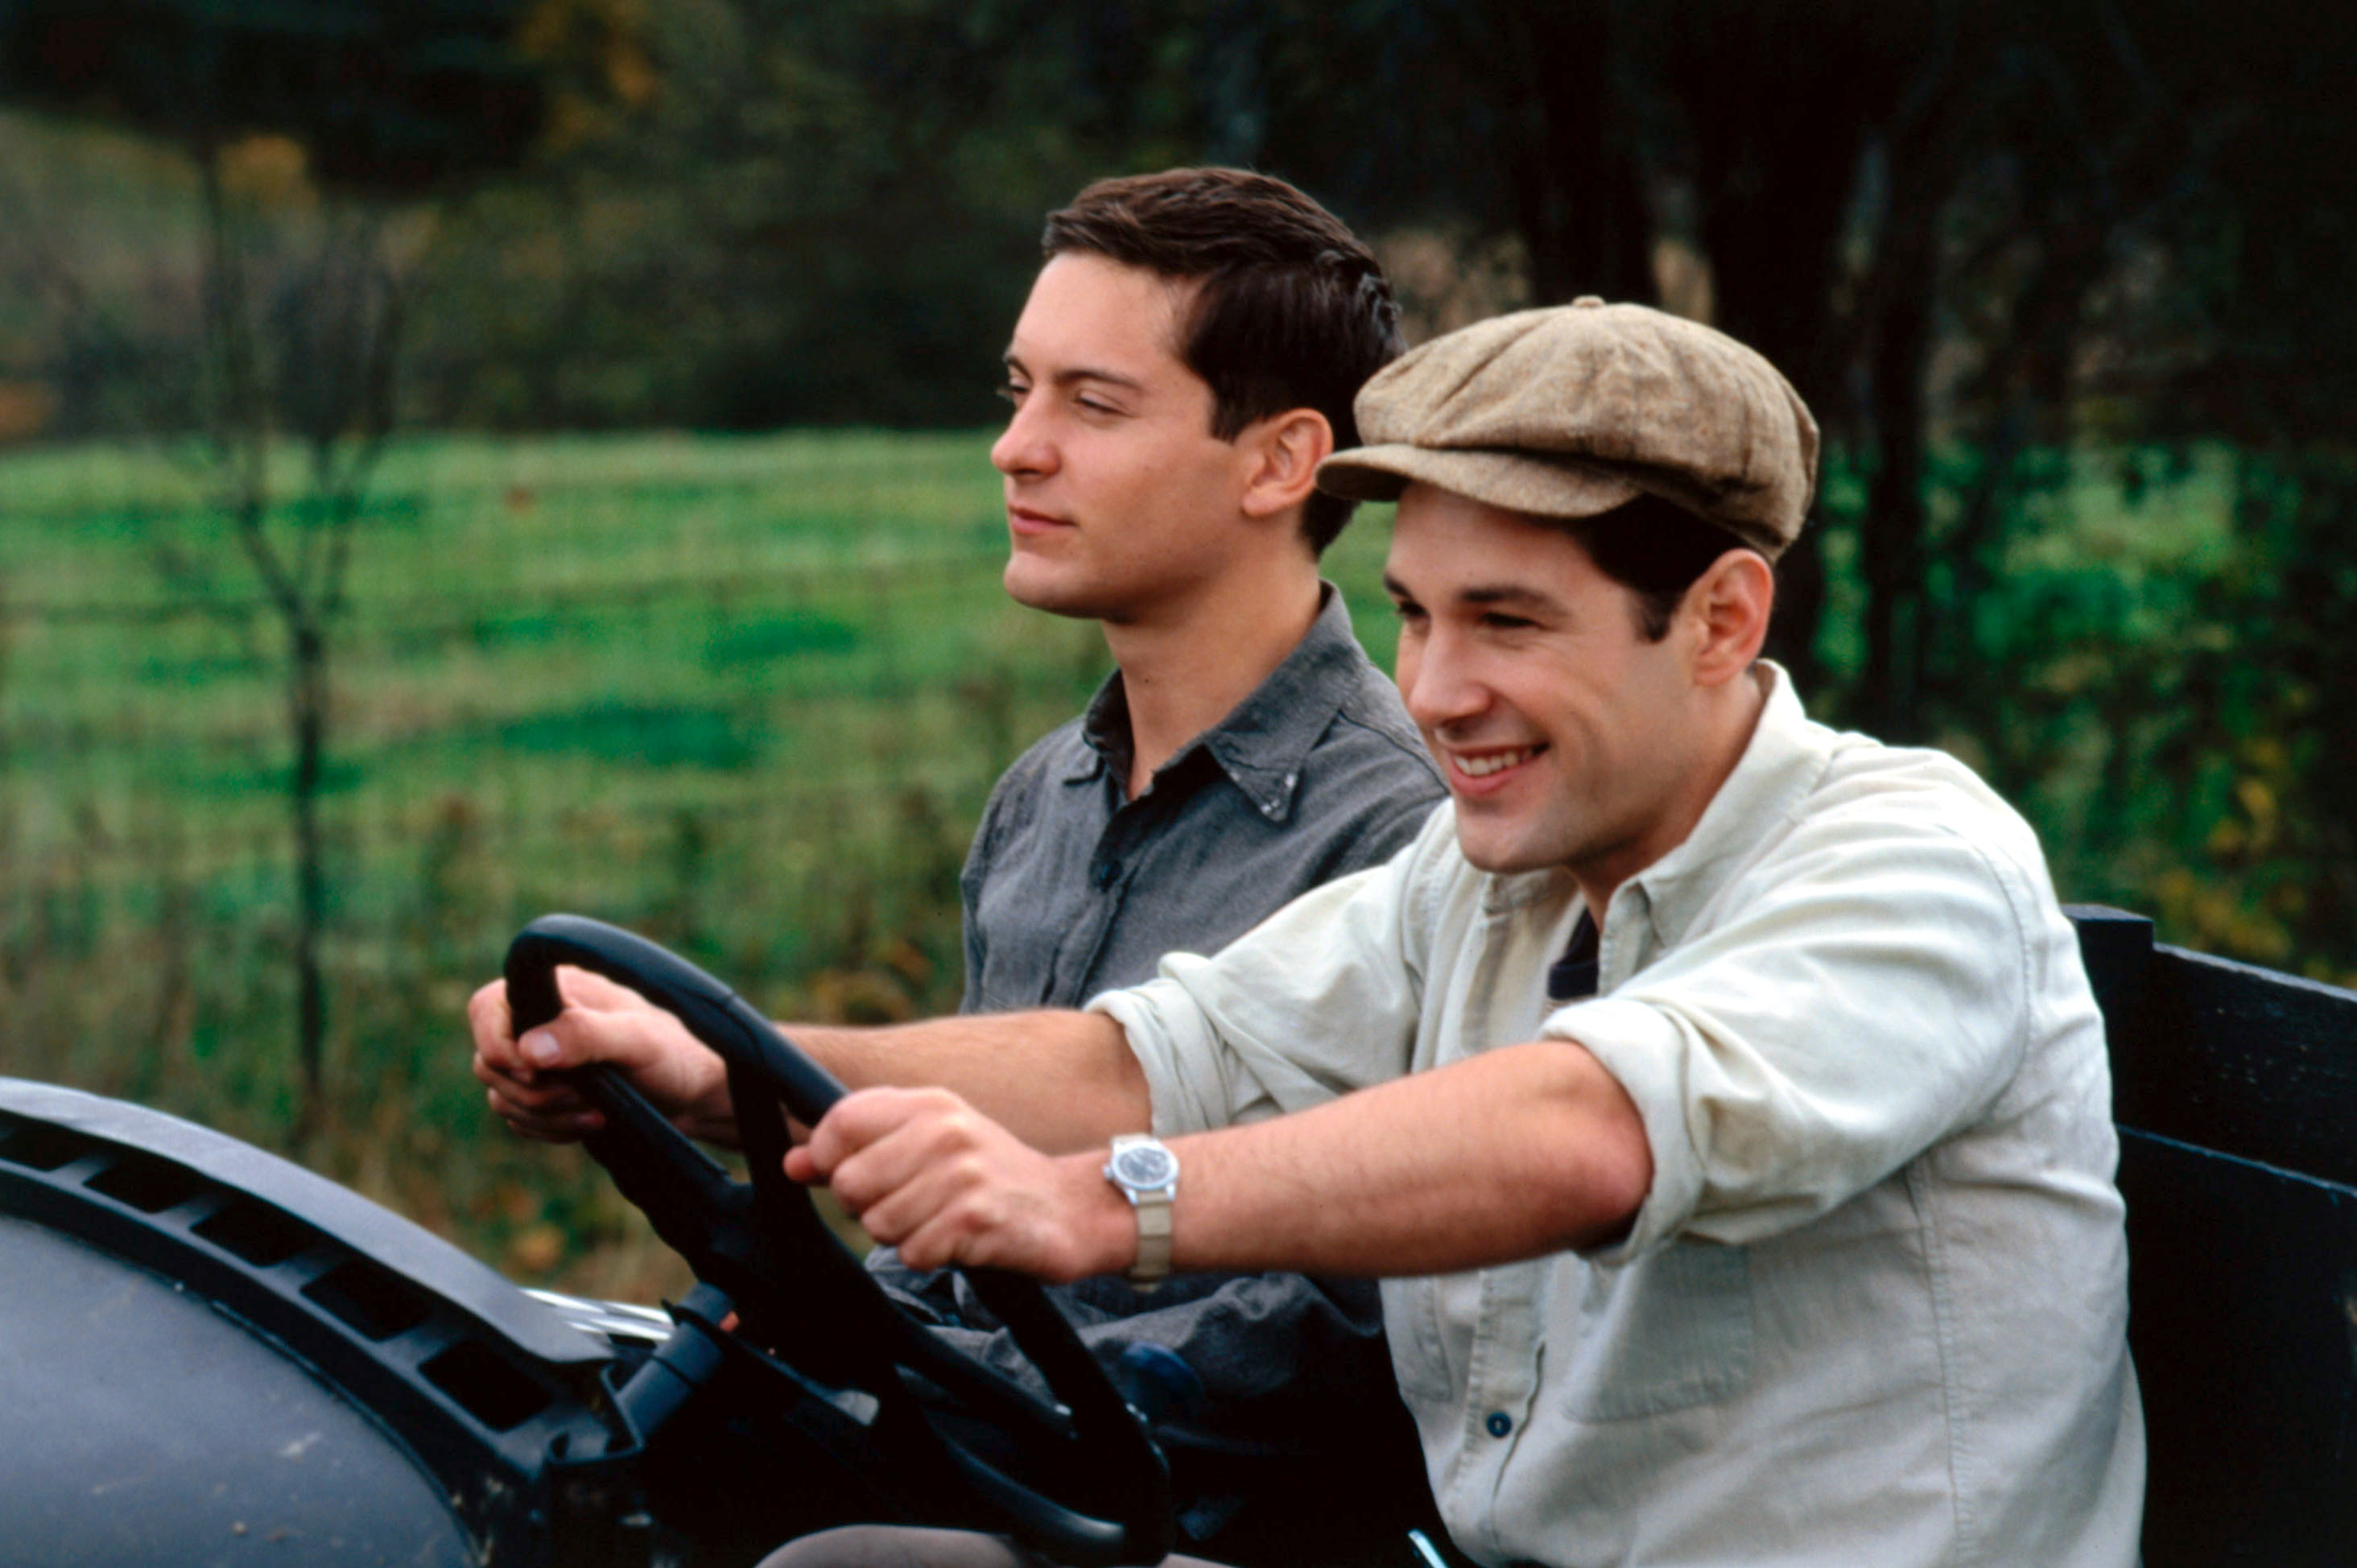 Tobey Maguire and another man in a vintage car in the Cider House Rules